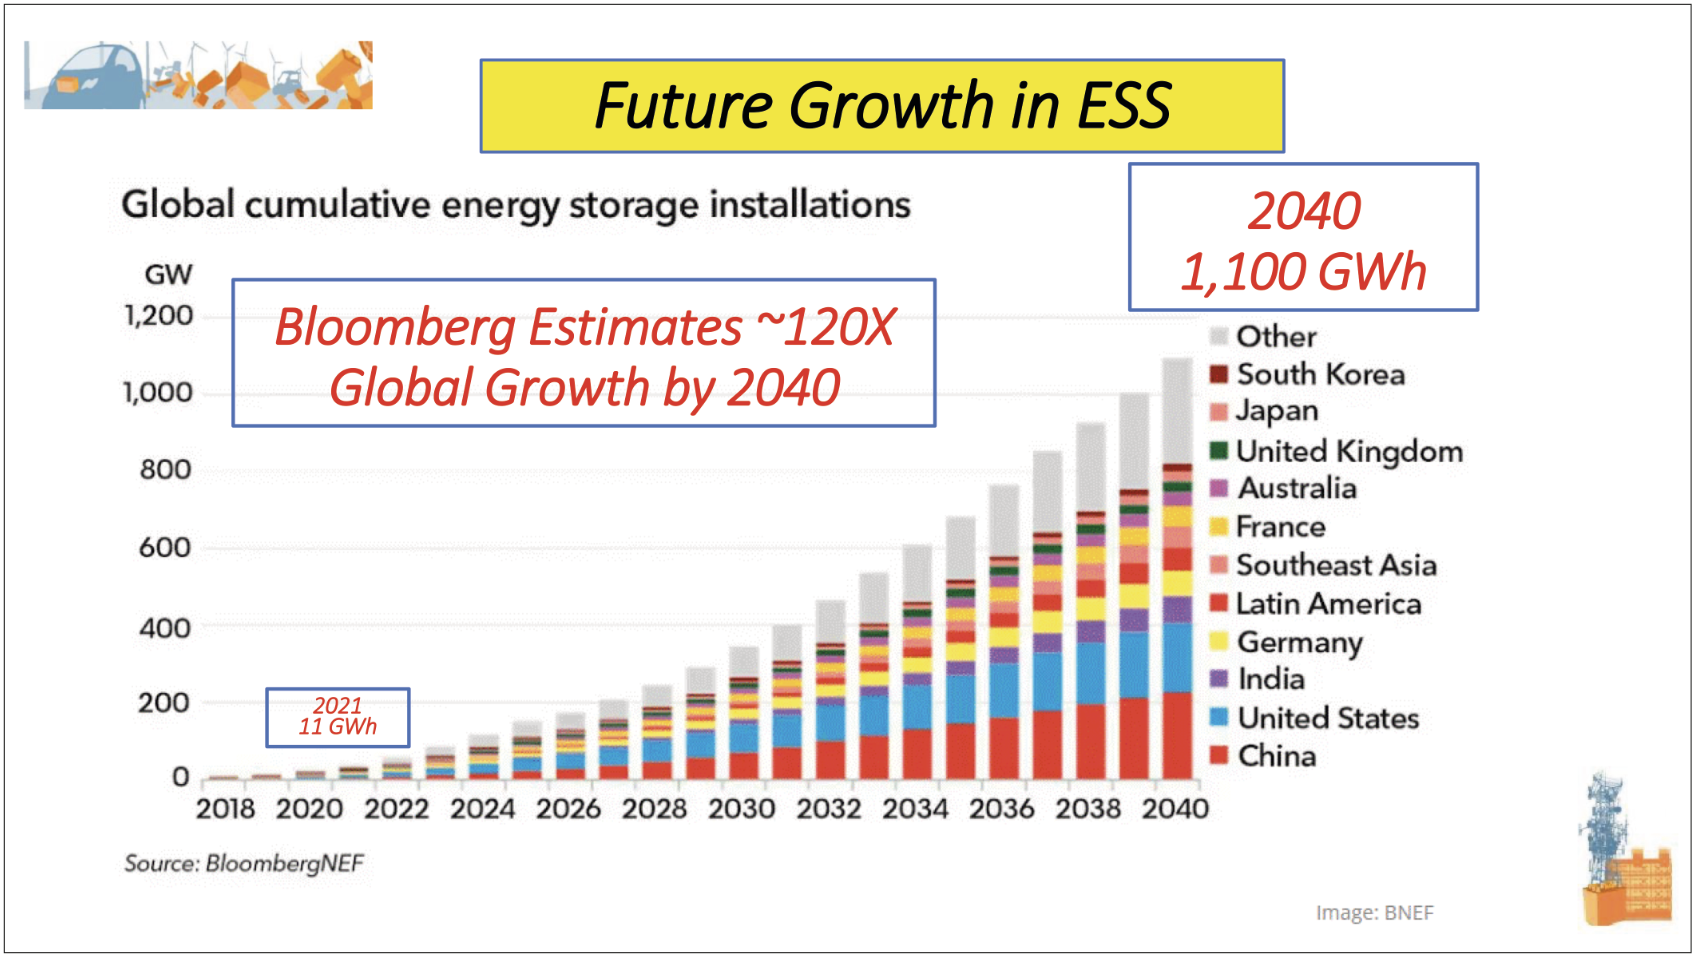 BNEF future growth in ESS